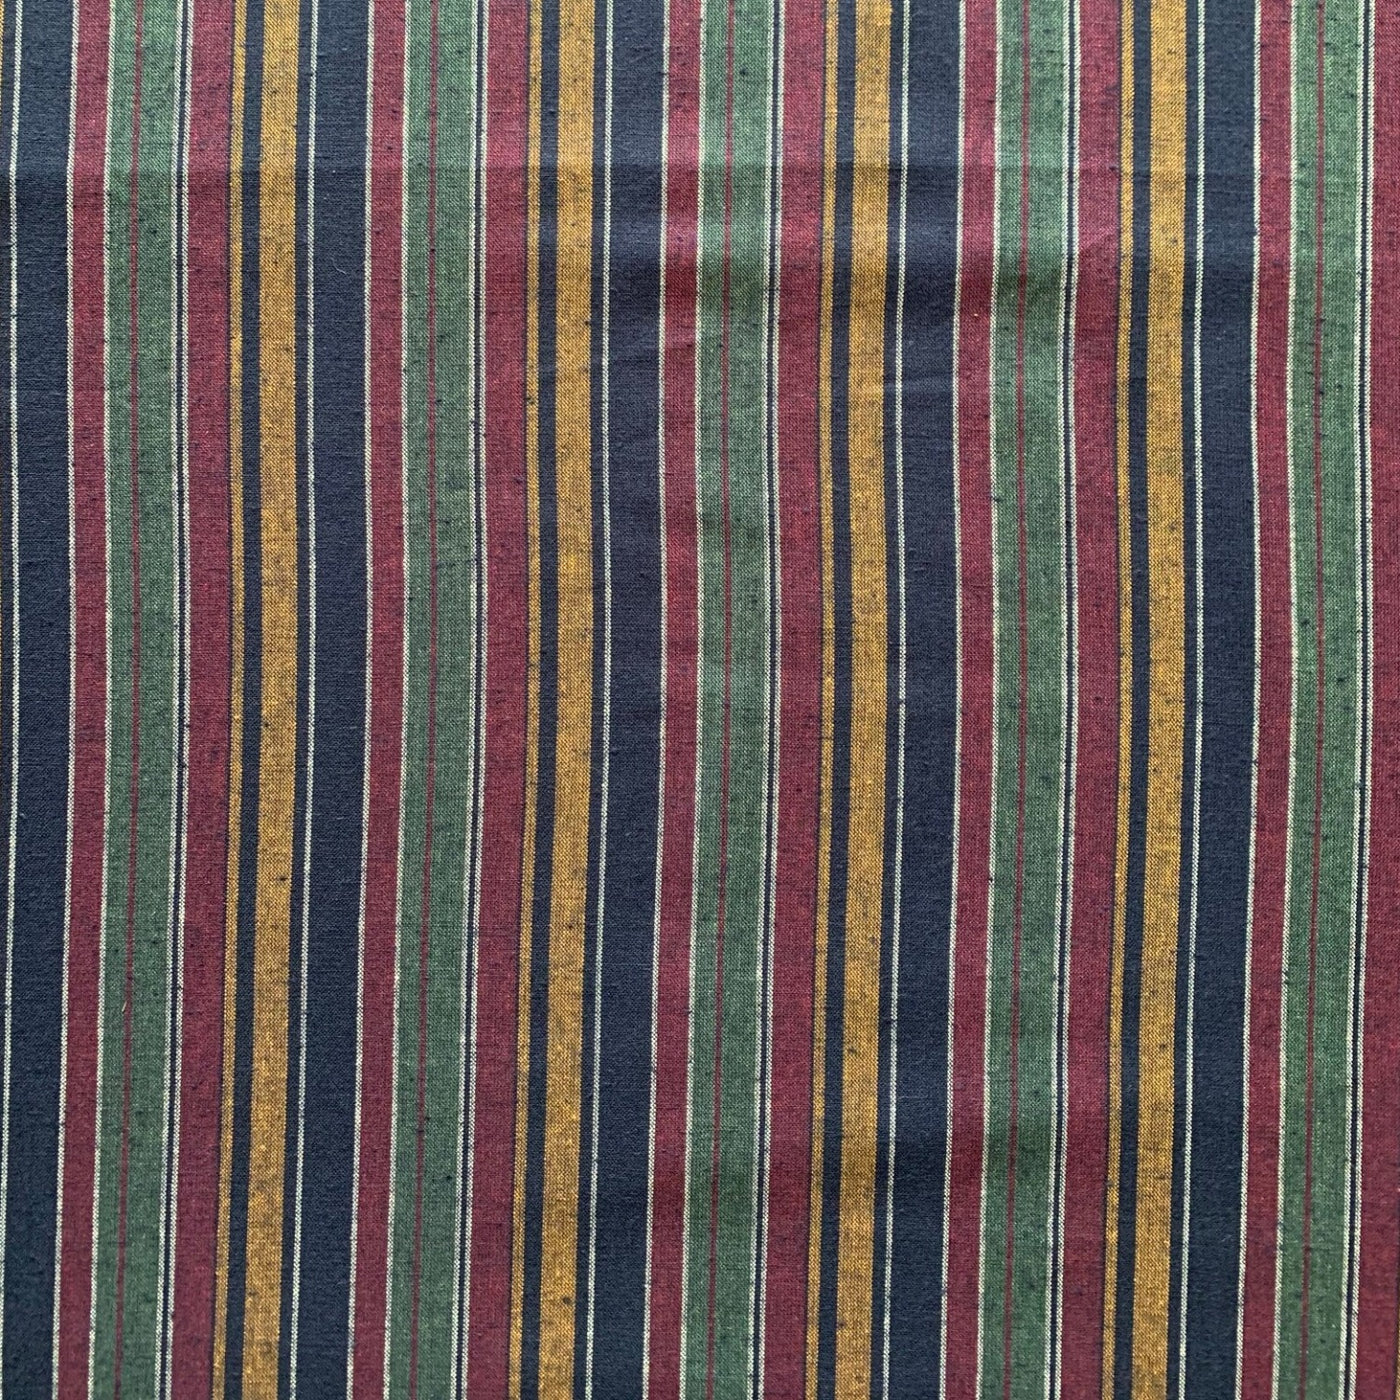 Yarn-dyed Stripe SY-2013-D Mustard stripe - Check fabric picture from floor